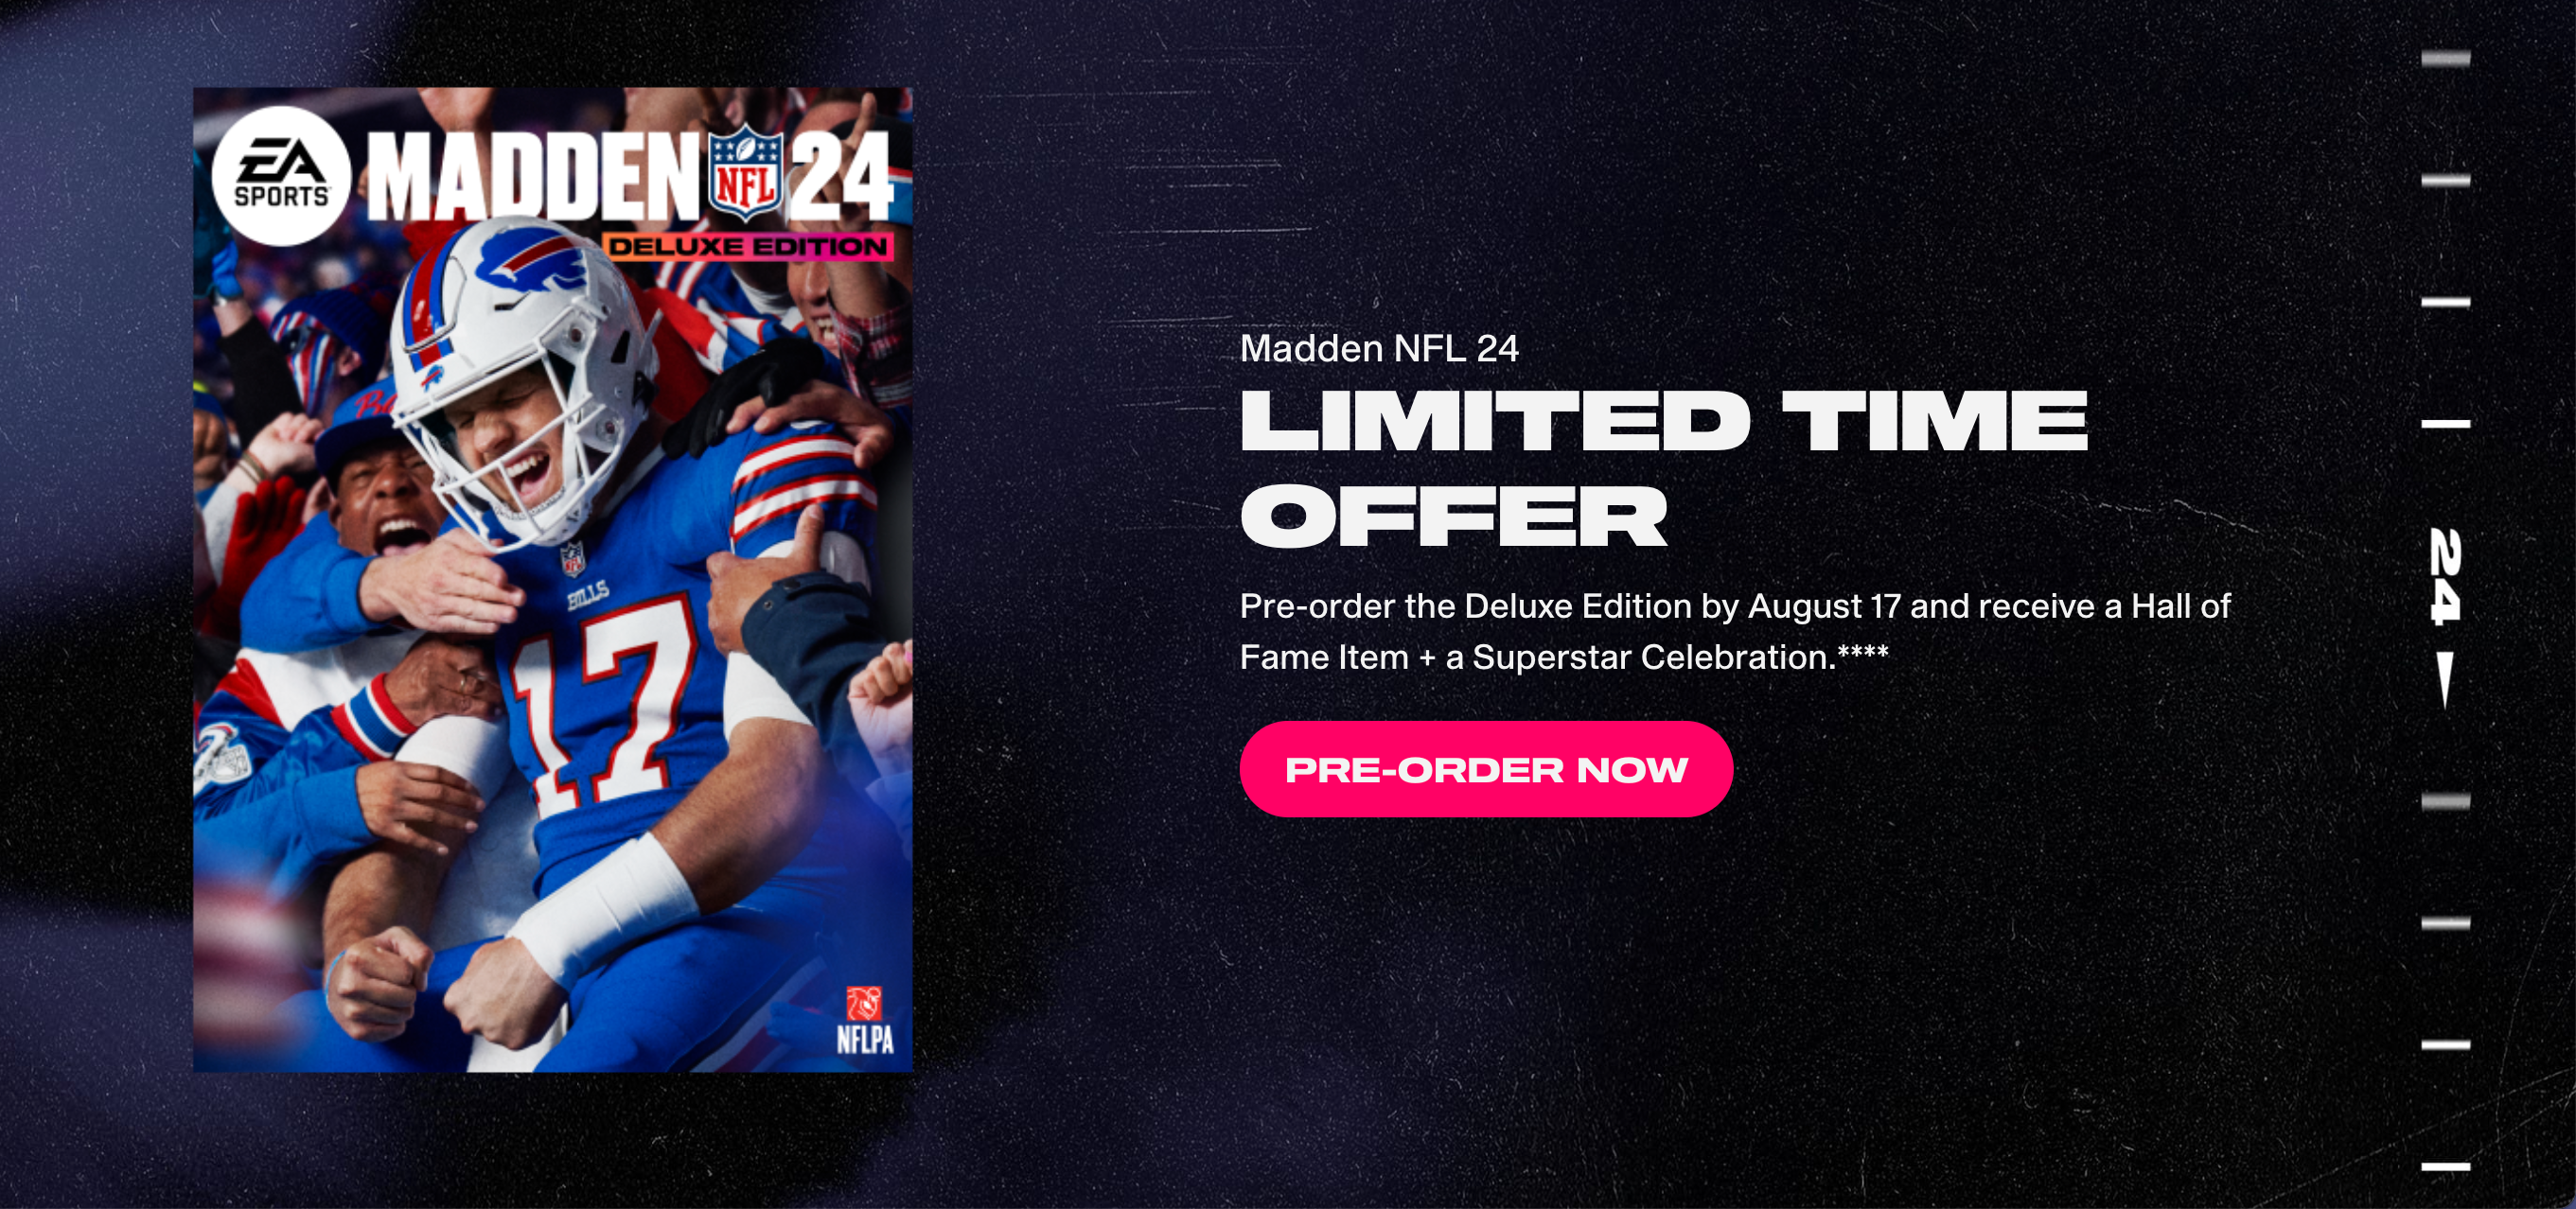 Pre-order Madden NFL 24 exclusive